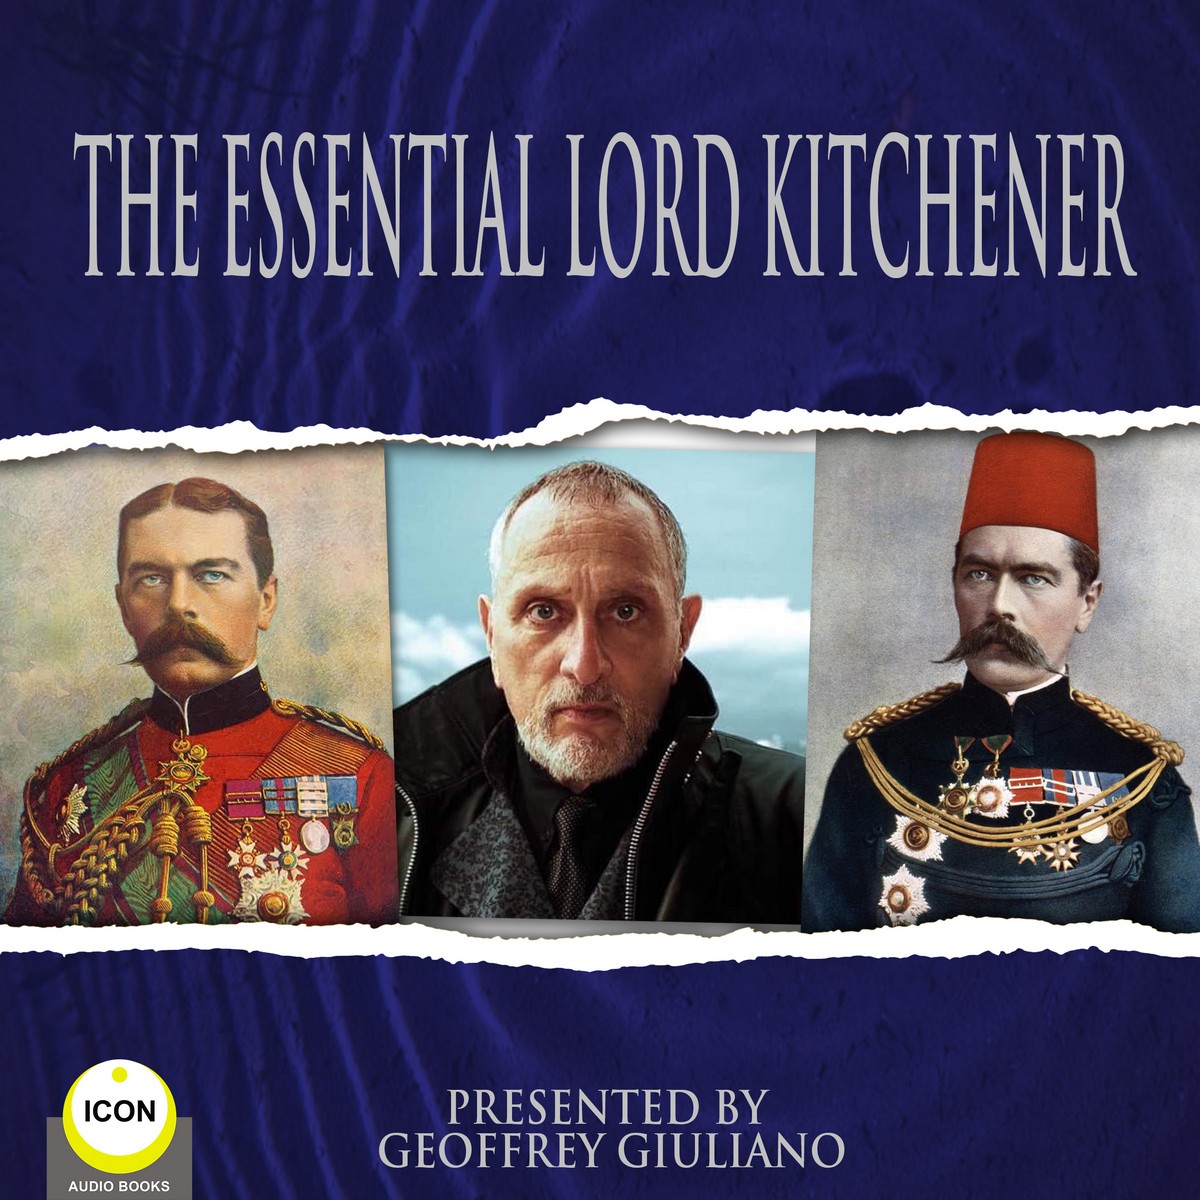 The Essential Lord Kitchener